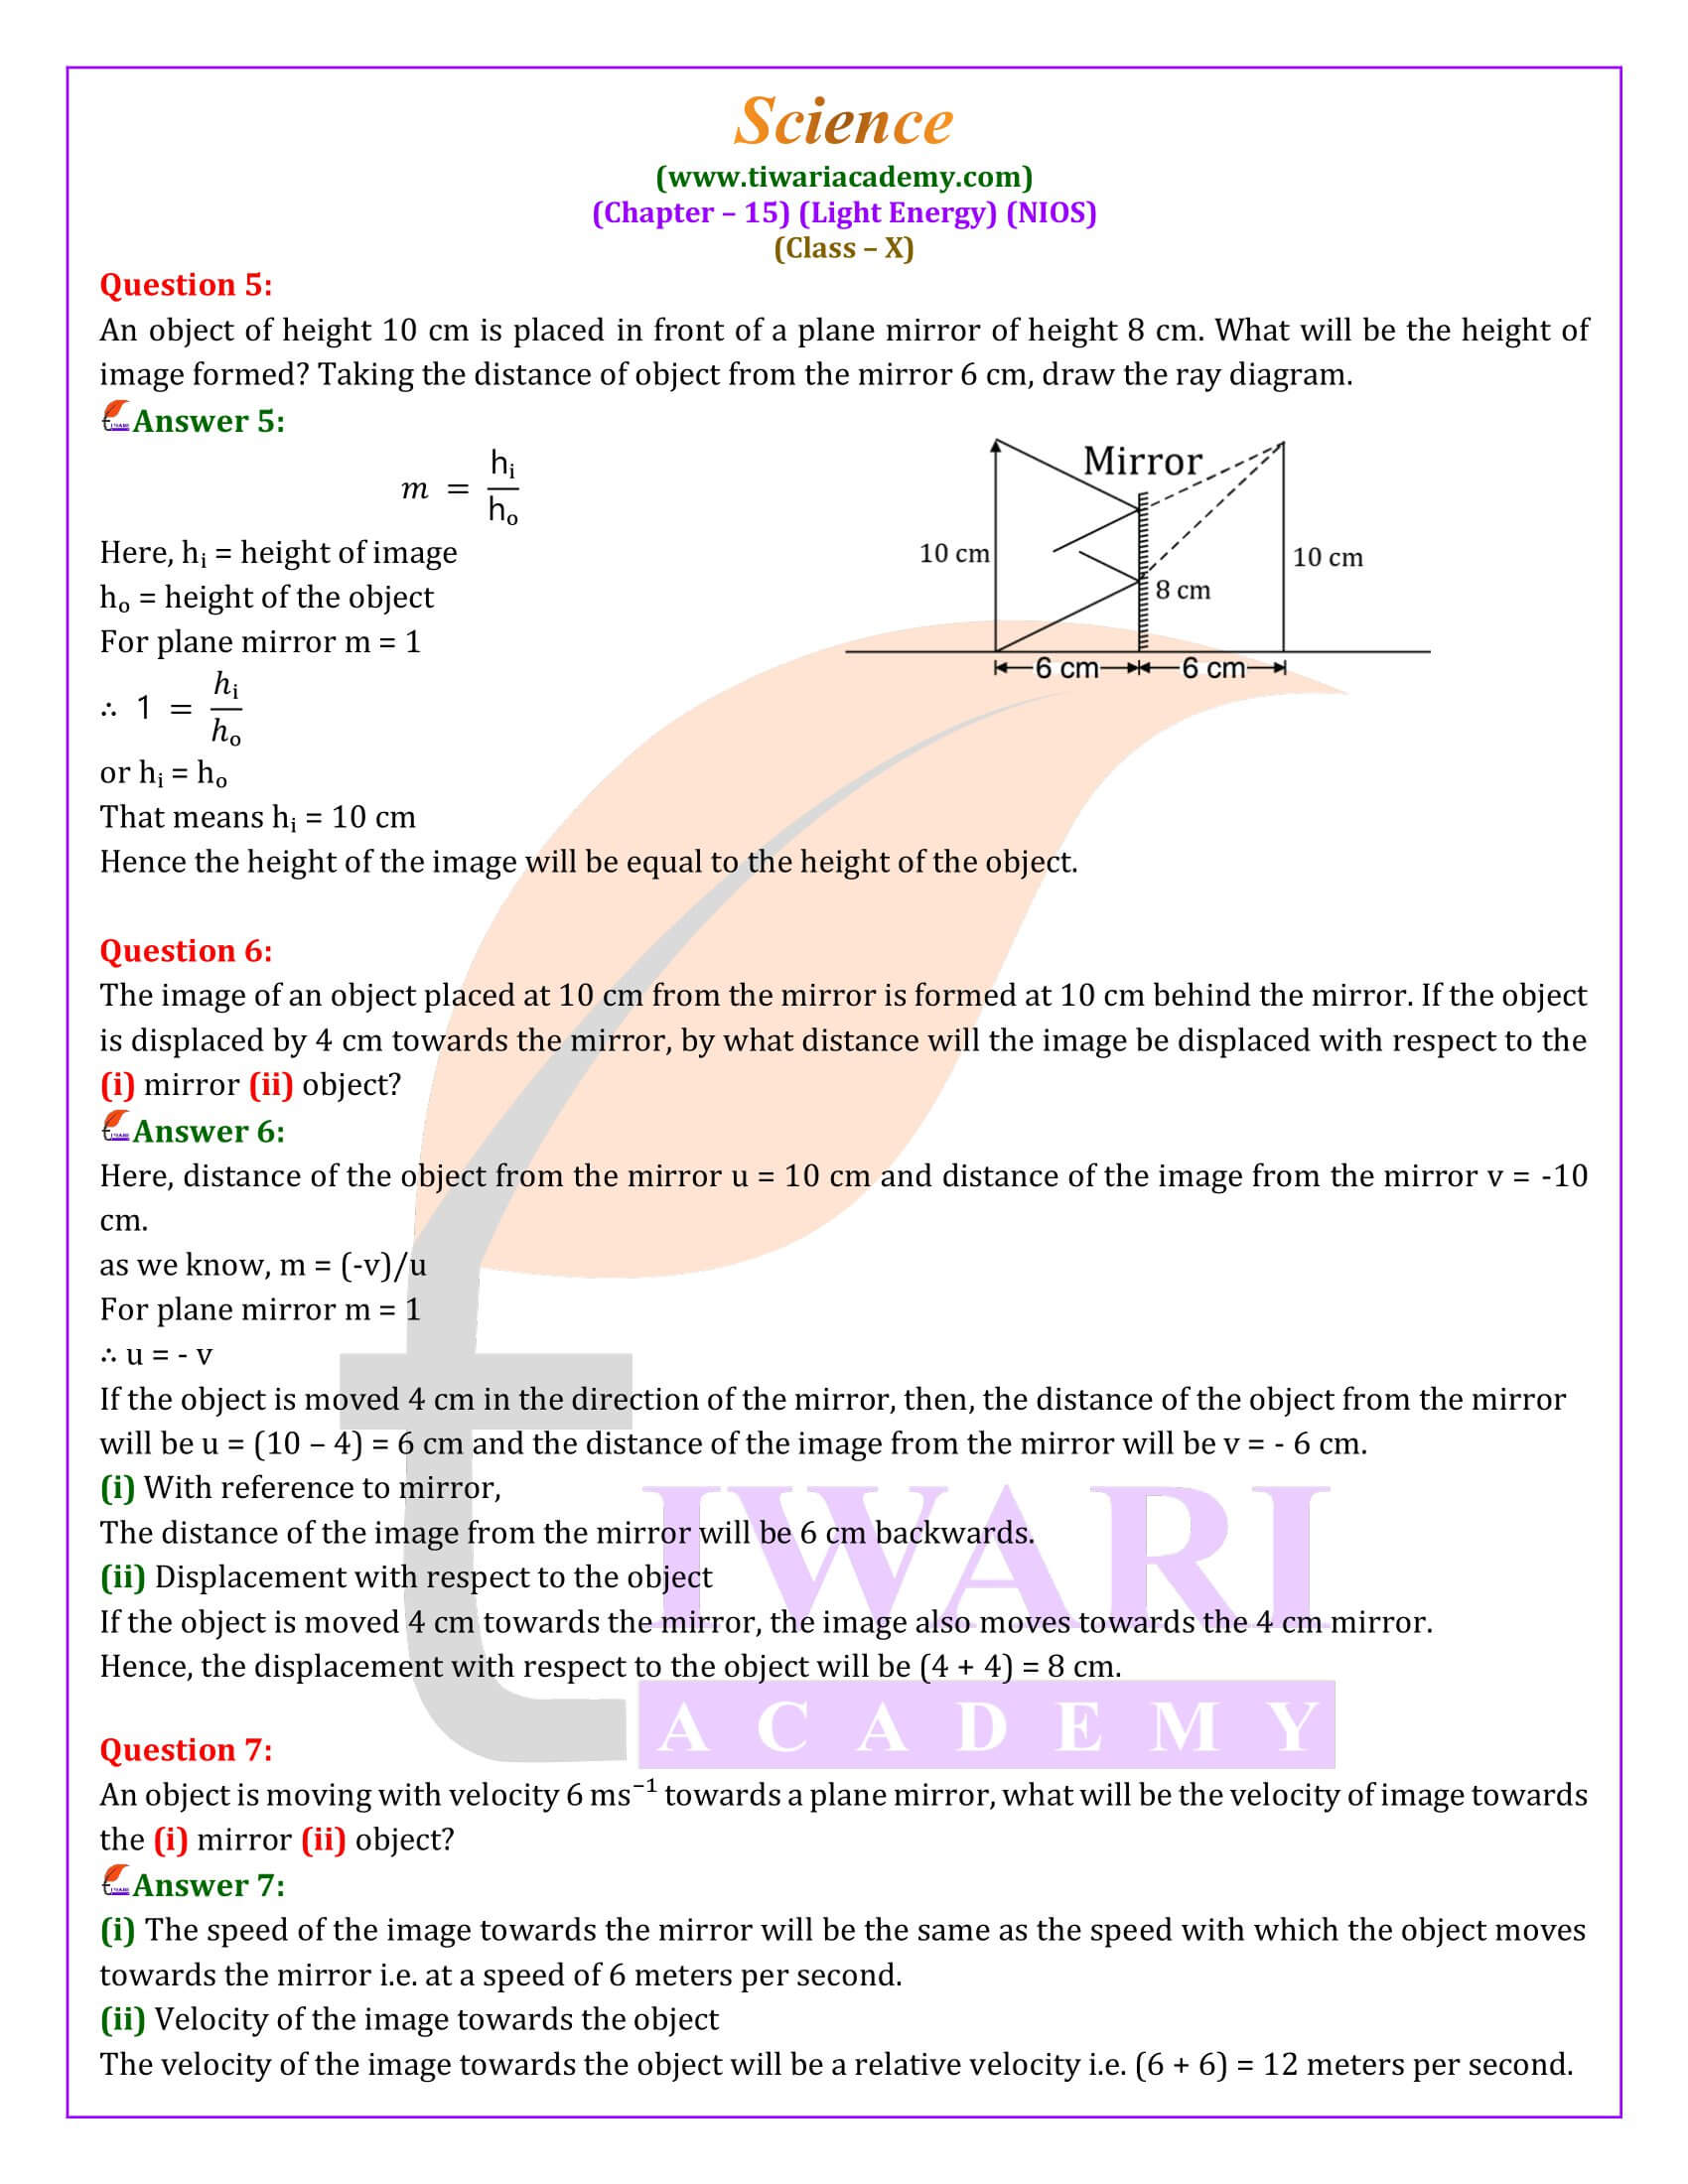 NIOS Class 10 Science Chapter 15 Light Energy Question Answers